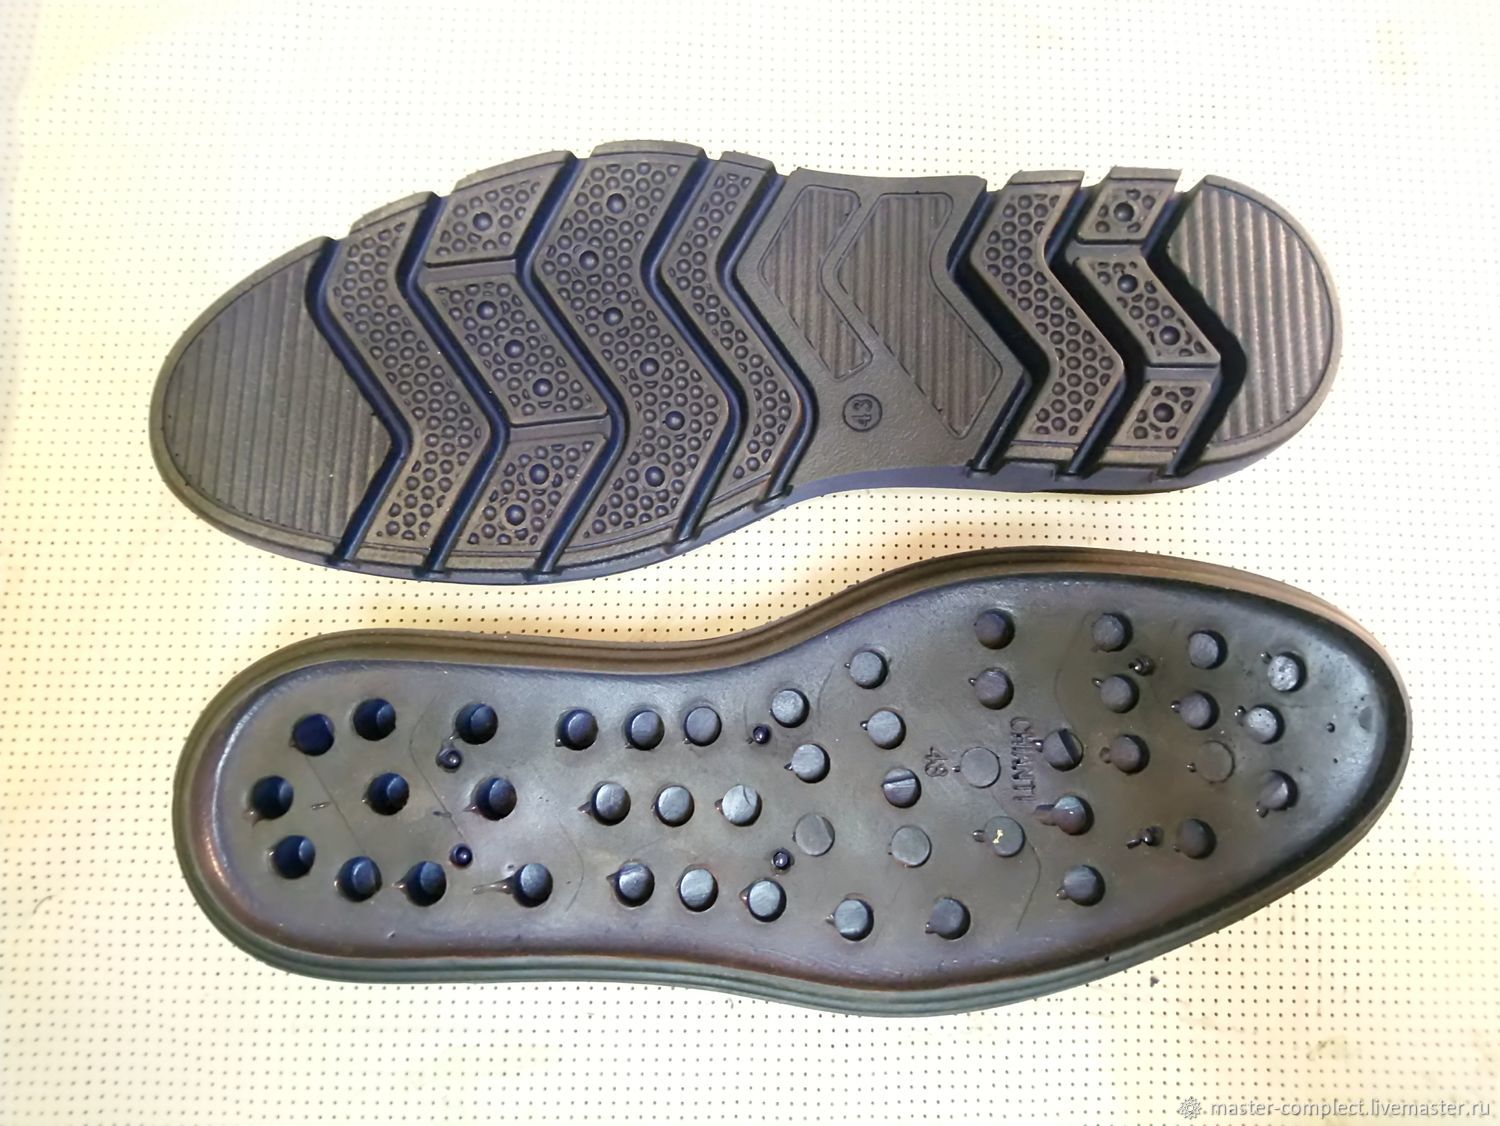 Sole for men's CHIANTI shoes, Soles, Moscow,  Фото №1